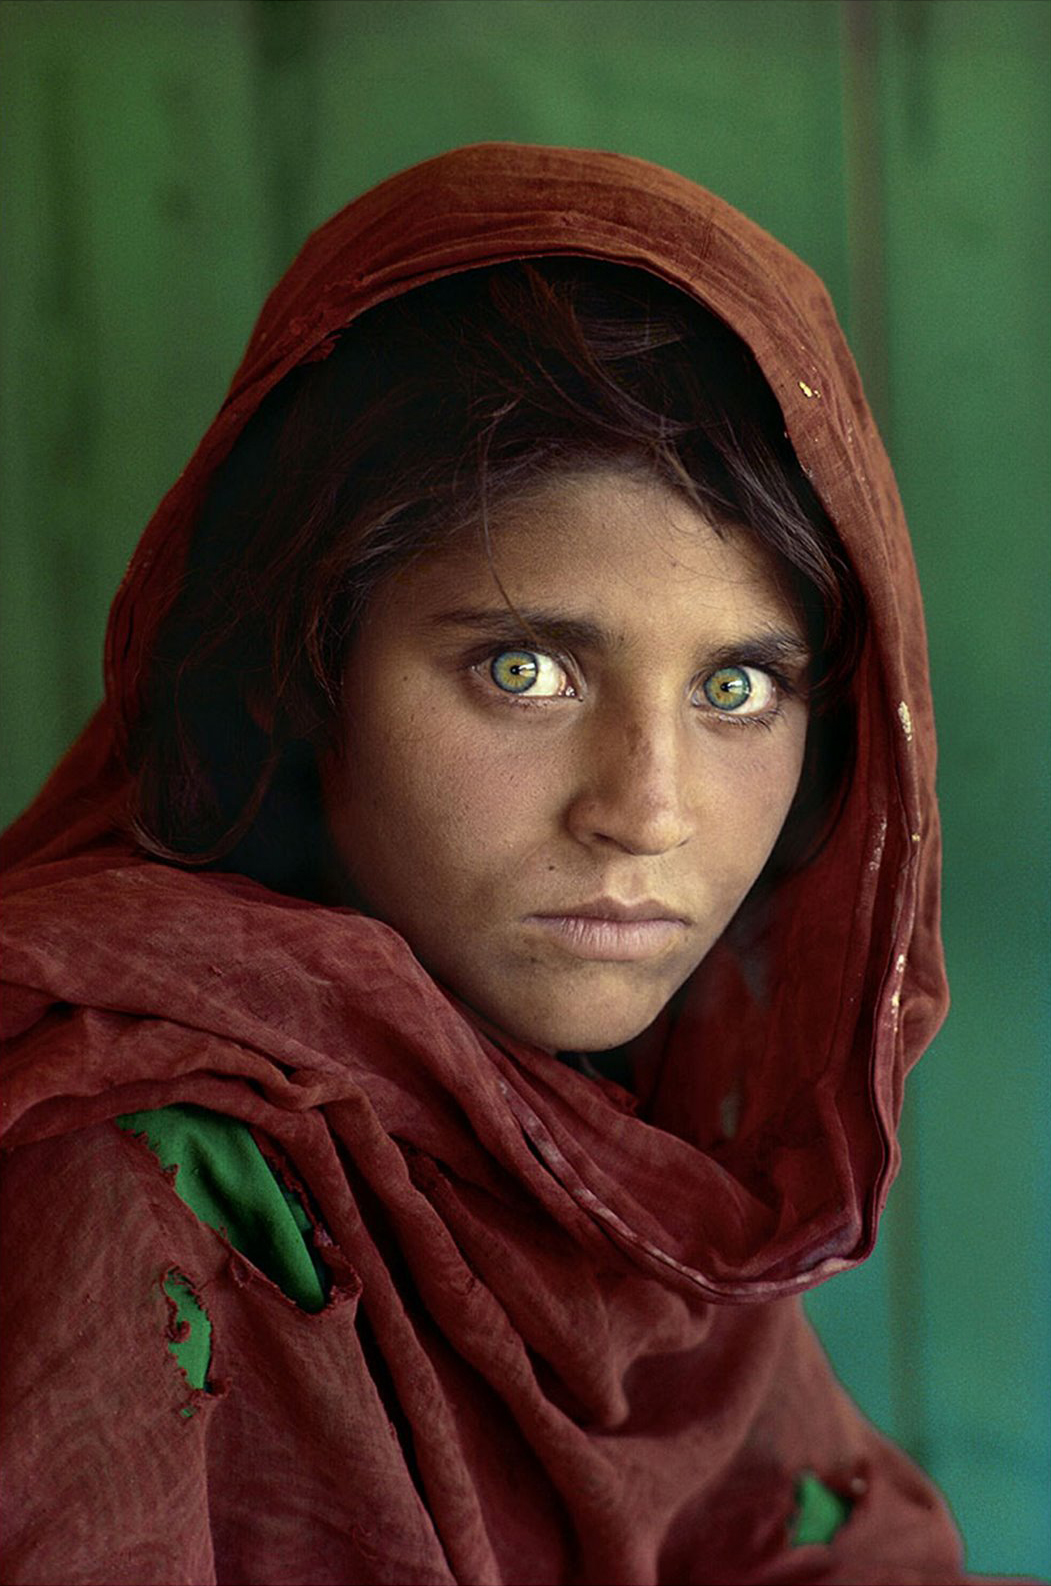 Sharbat Gula's 1984 portrait by Steve McCurry for National Geographic magazine.